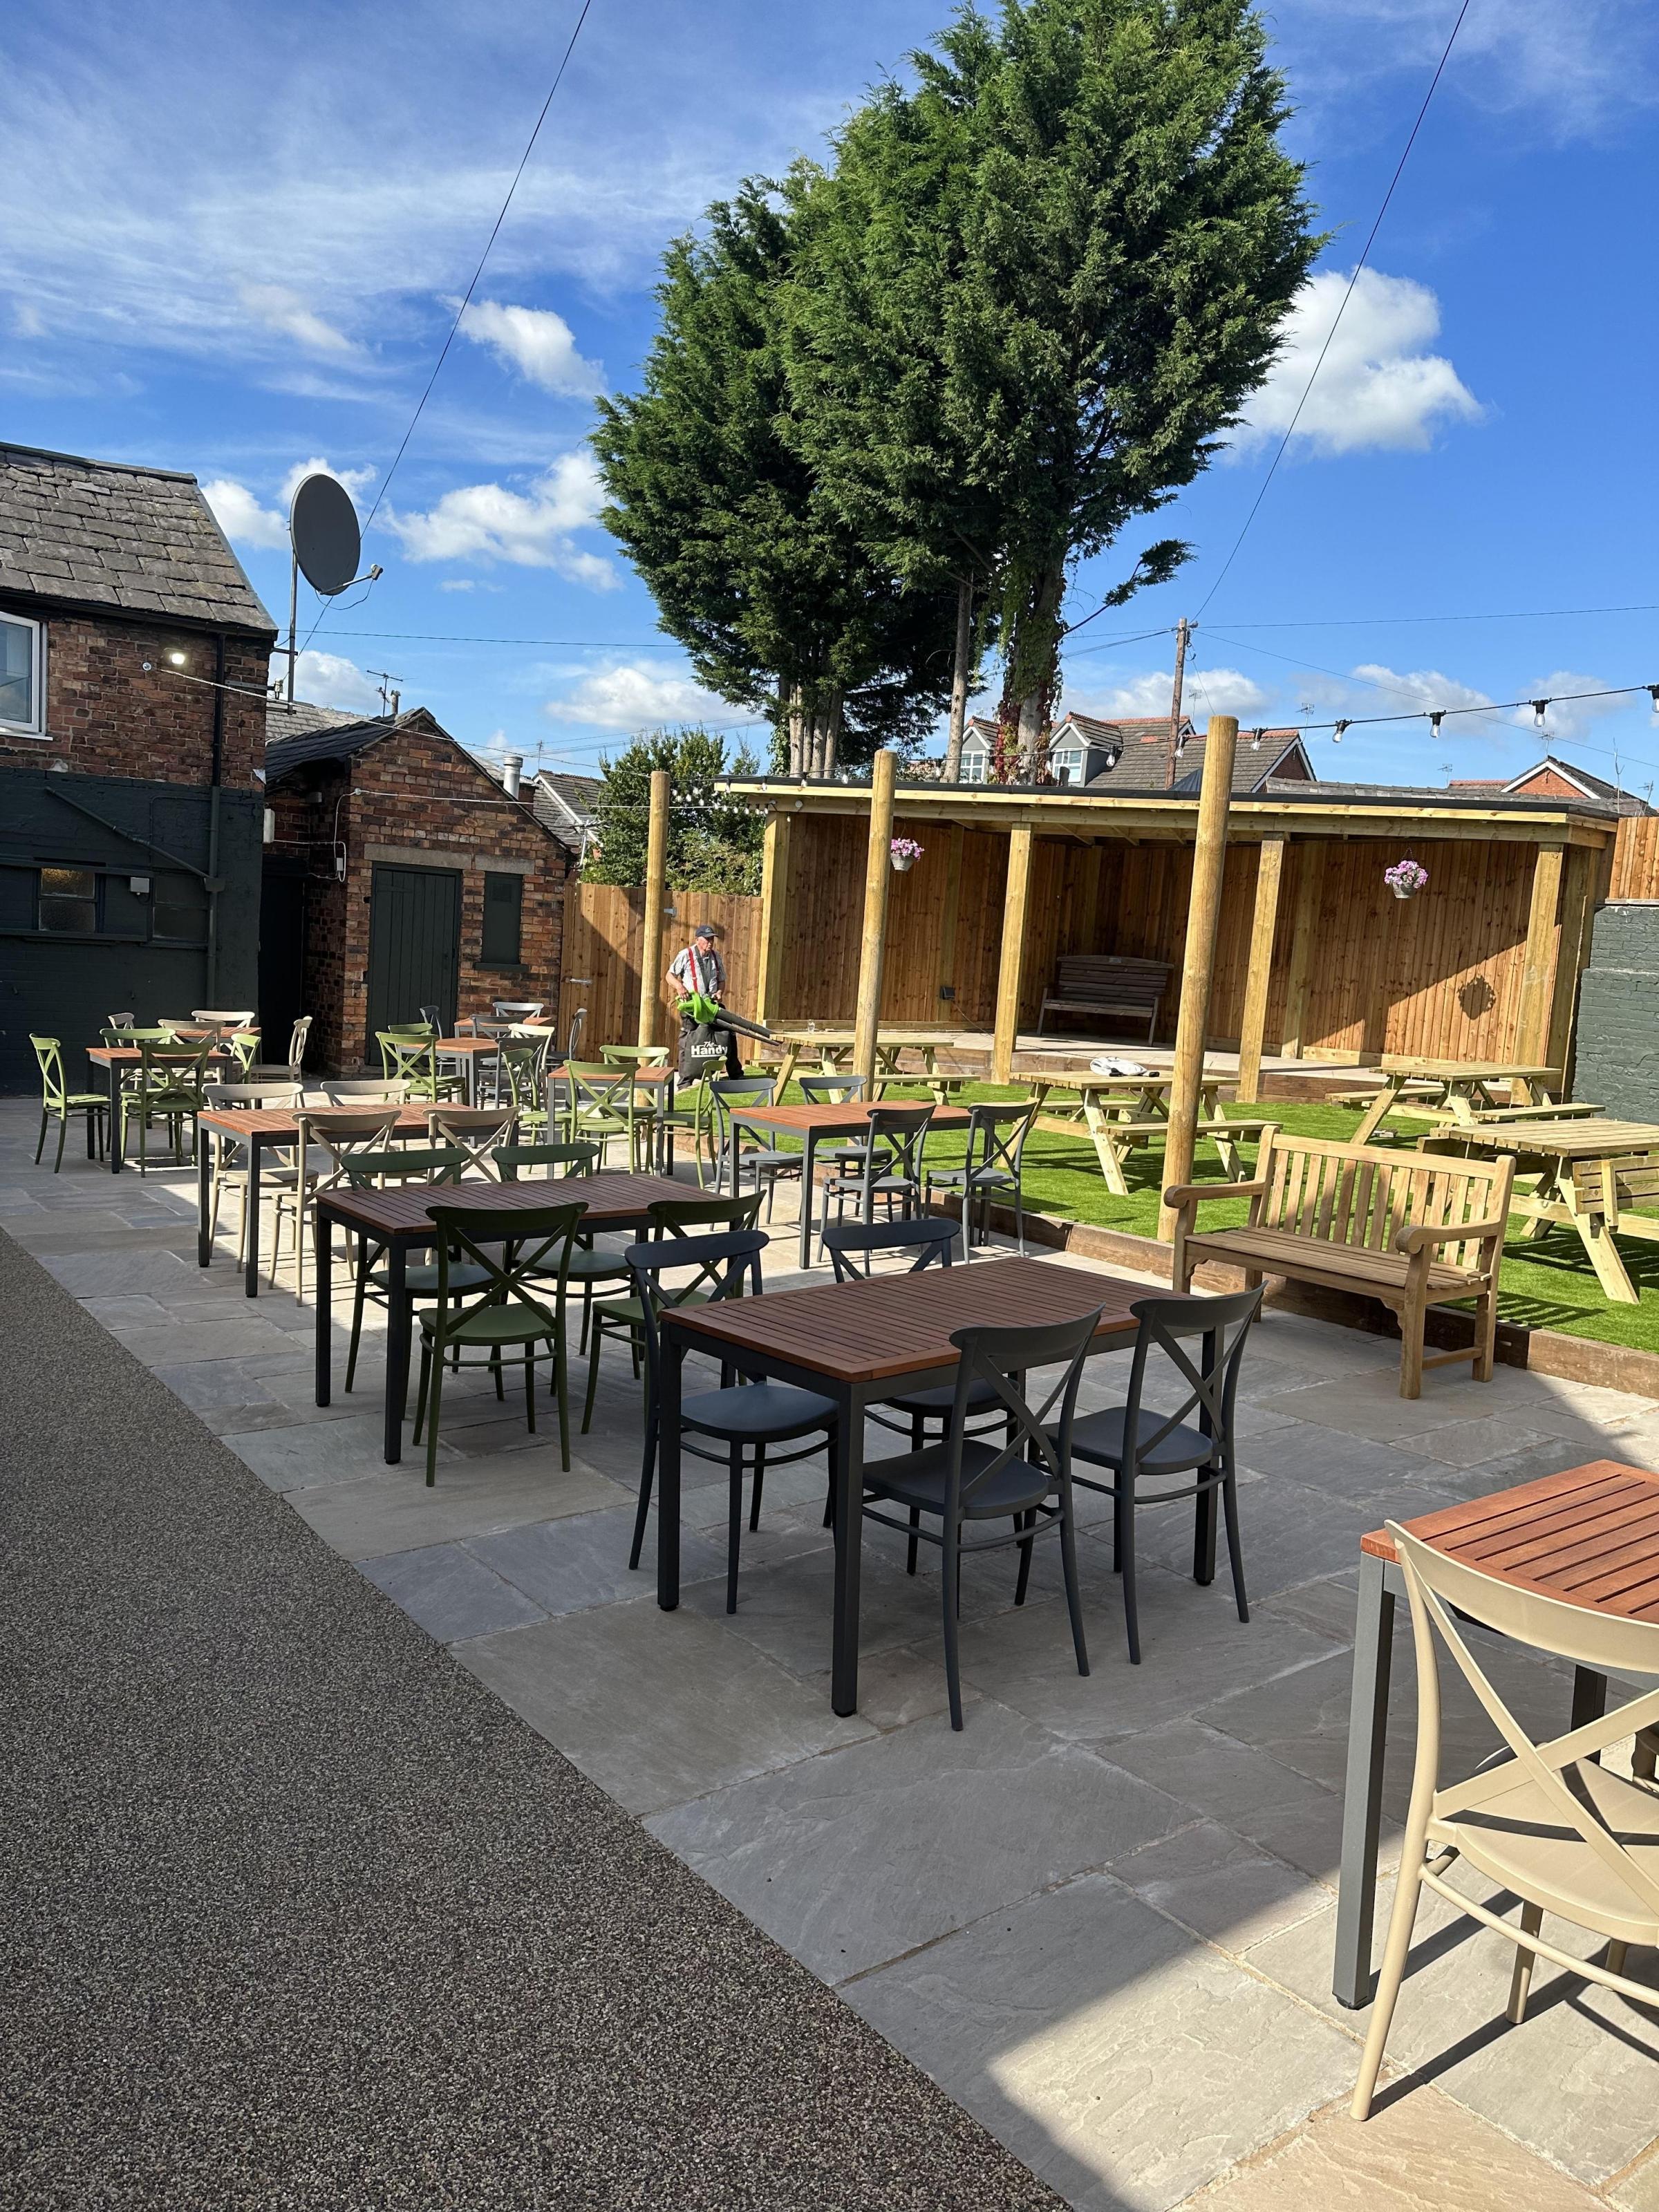 The beer garden is popular with customers wanting a drink in the sunshine